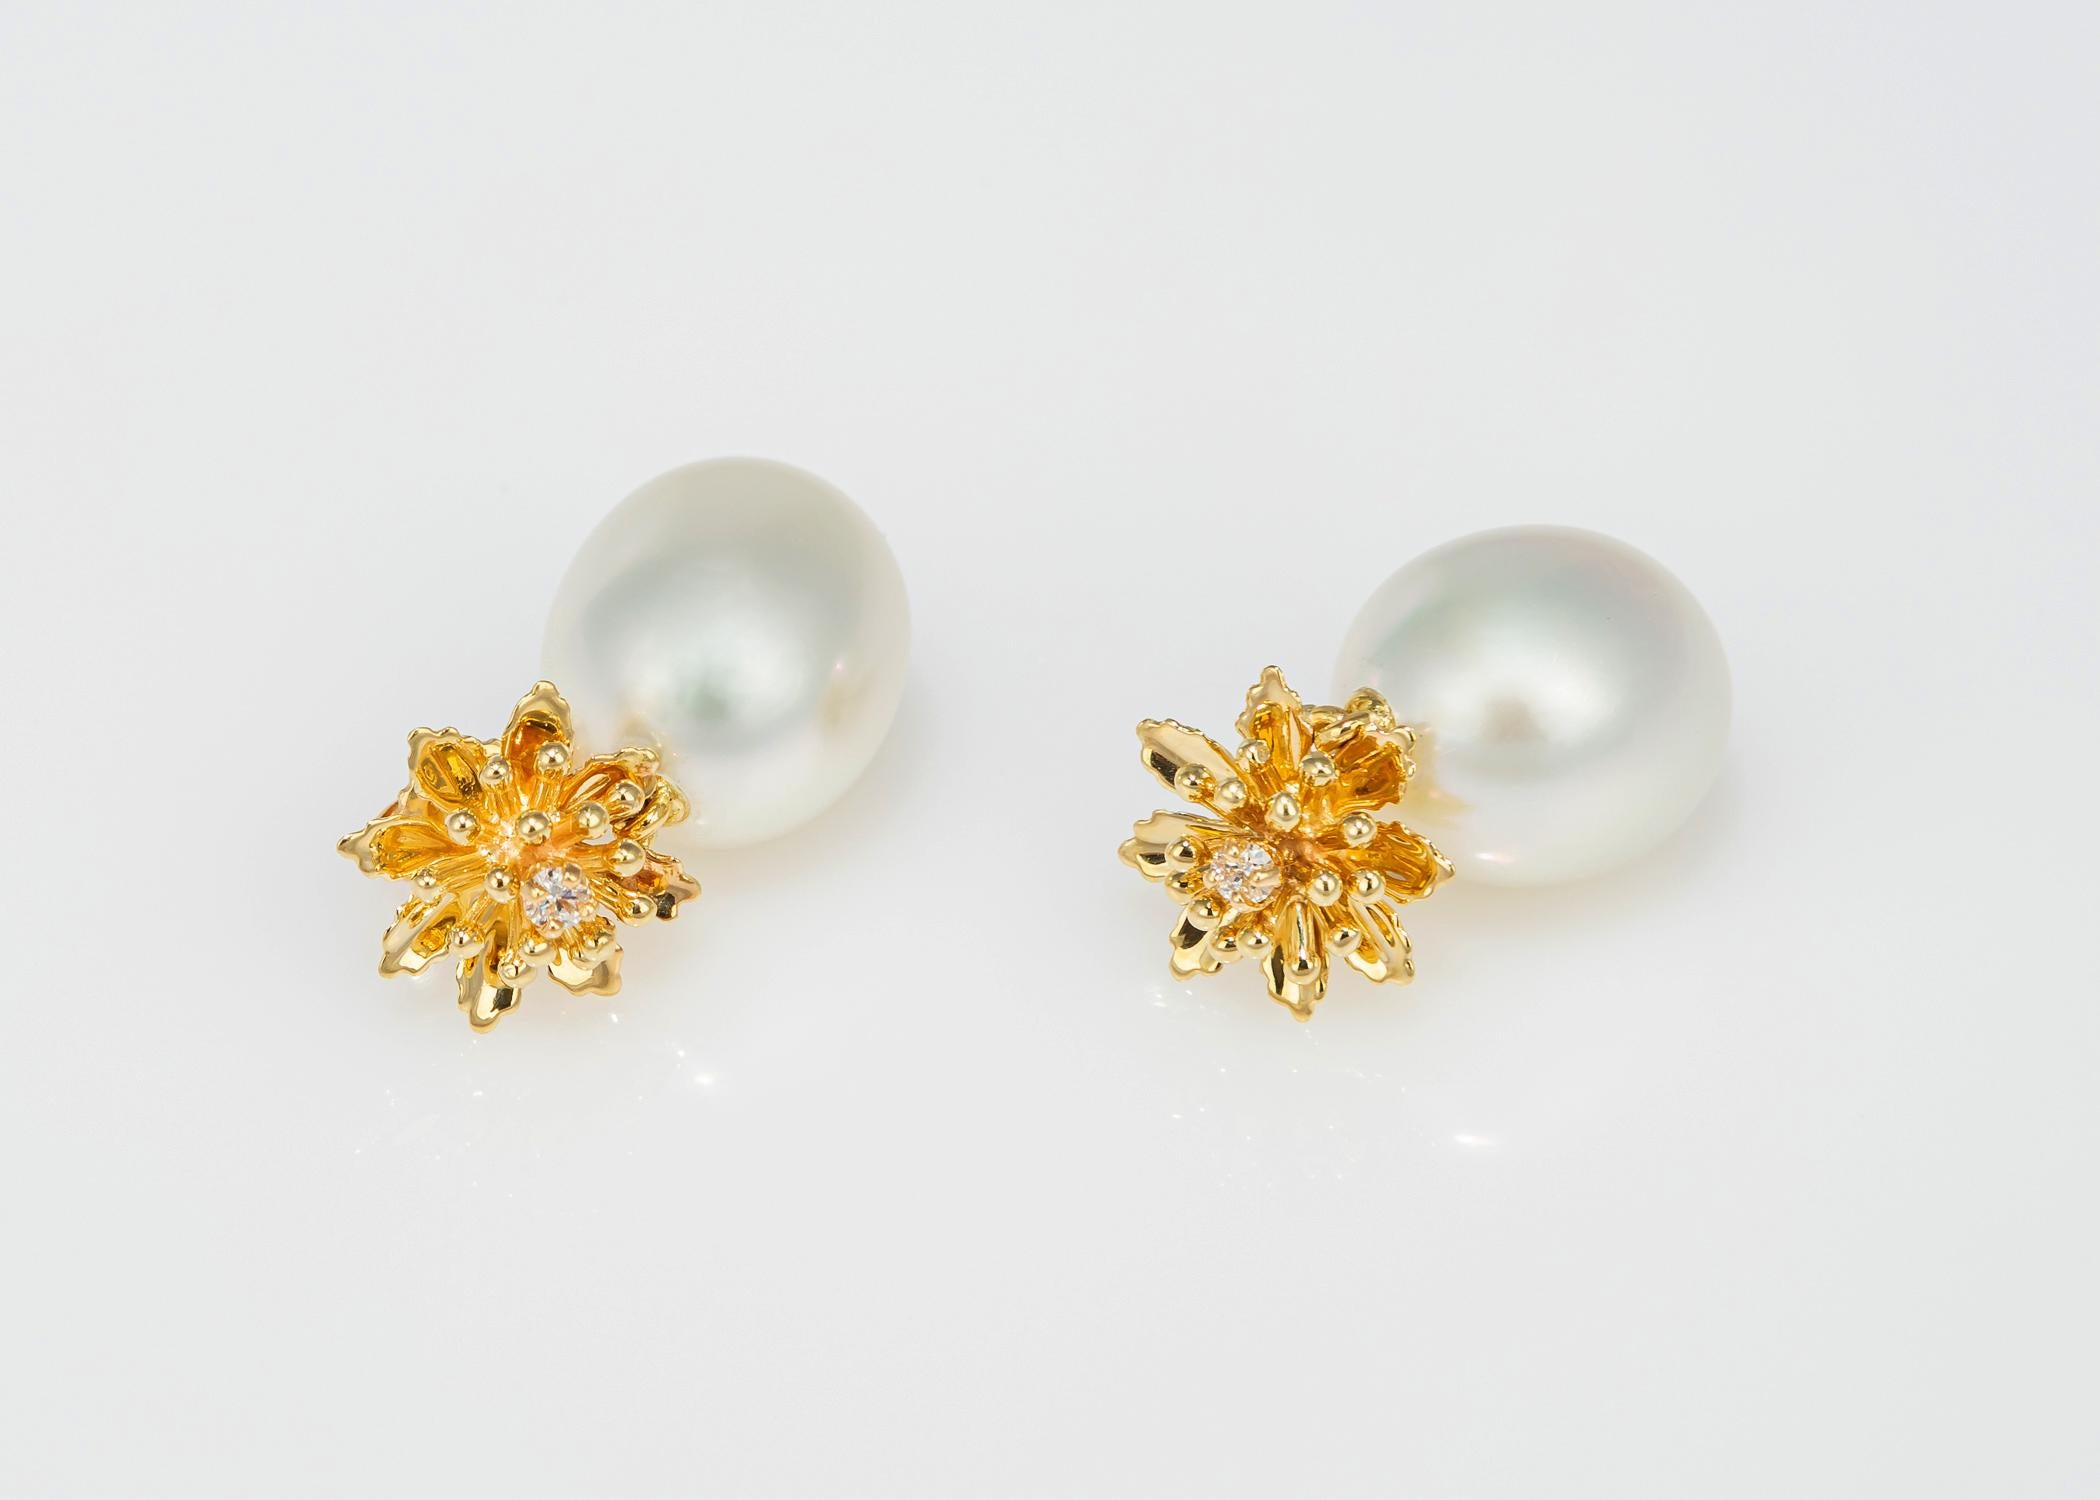 Can an earring look happy ? Tiffany & Co. creates a beautiful gold flower with amazing detailing adds glowing South Sea pearls and finishes with two small brilliant cut diamonds right in the middle. Just over 1 inch in length. The South Sea pearls